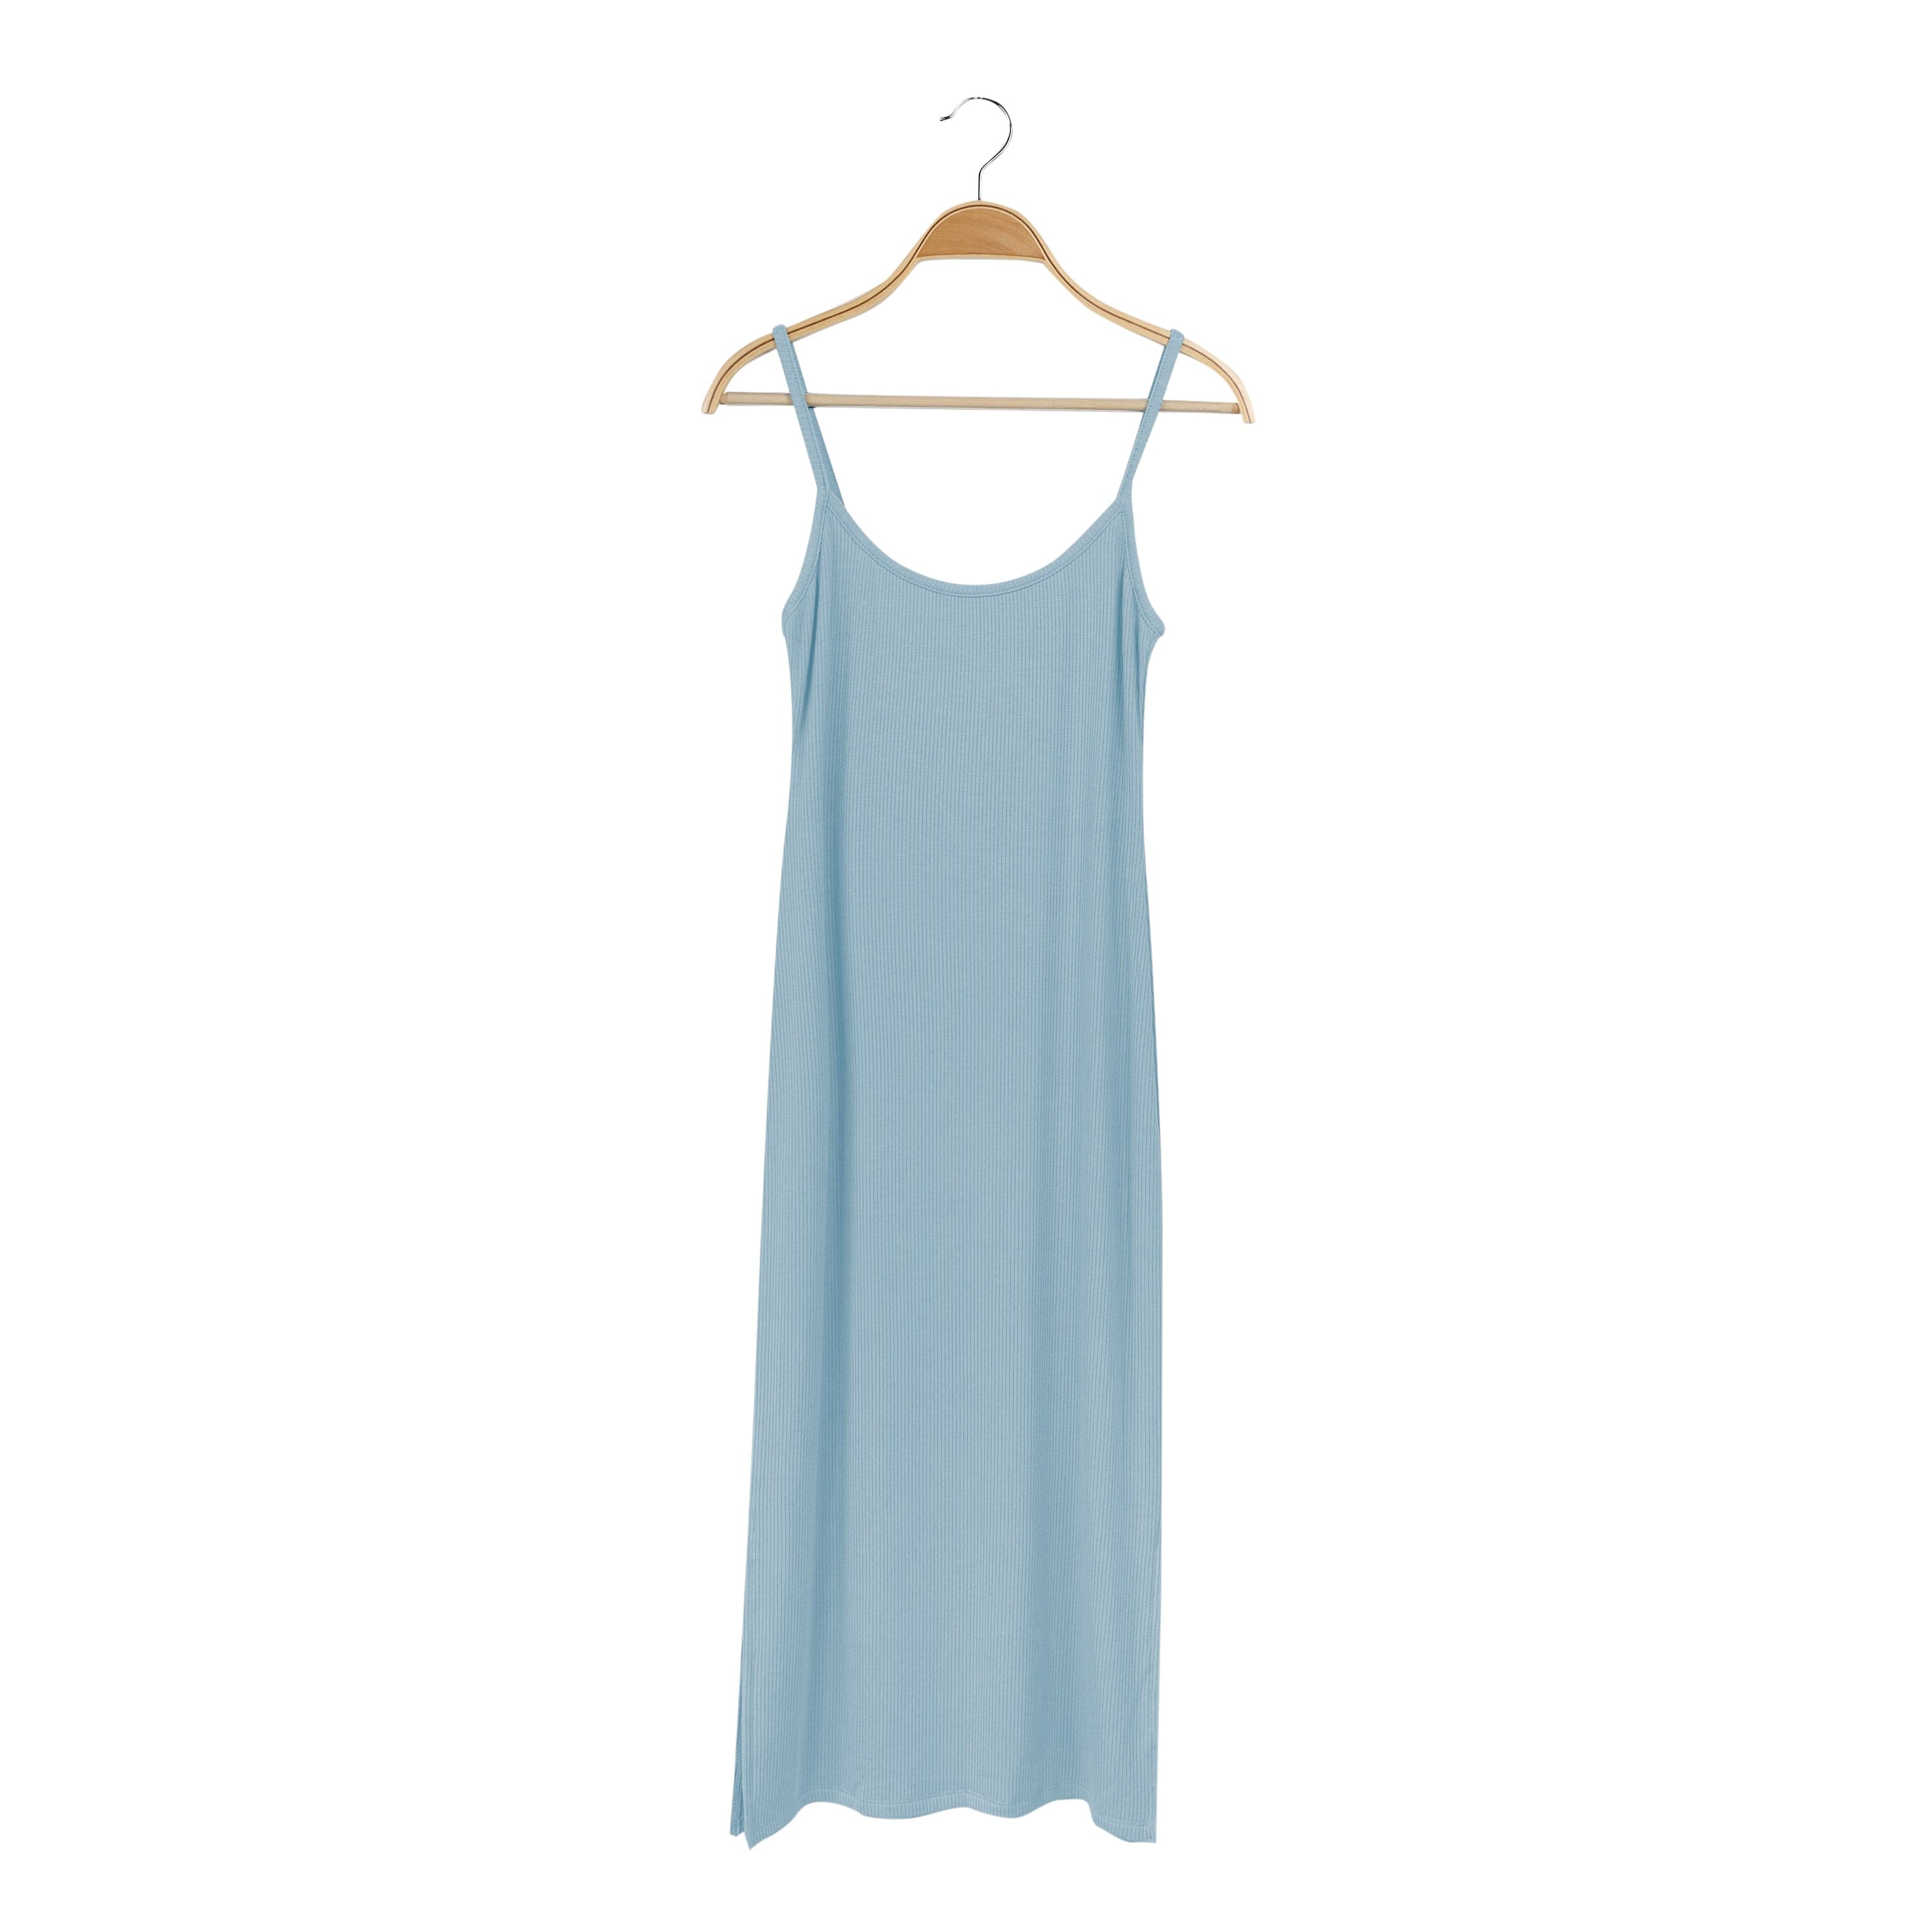 Kyte Baby Ribbed Women's Cami Dress Women's Ribbed Cami Dress in Dusty Blue